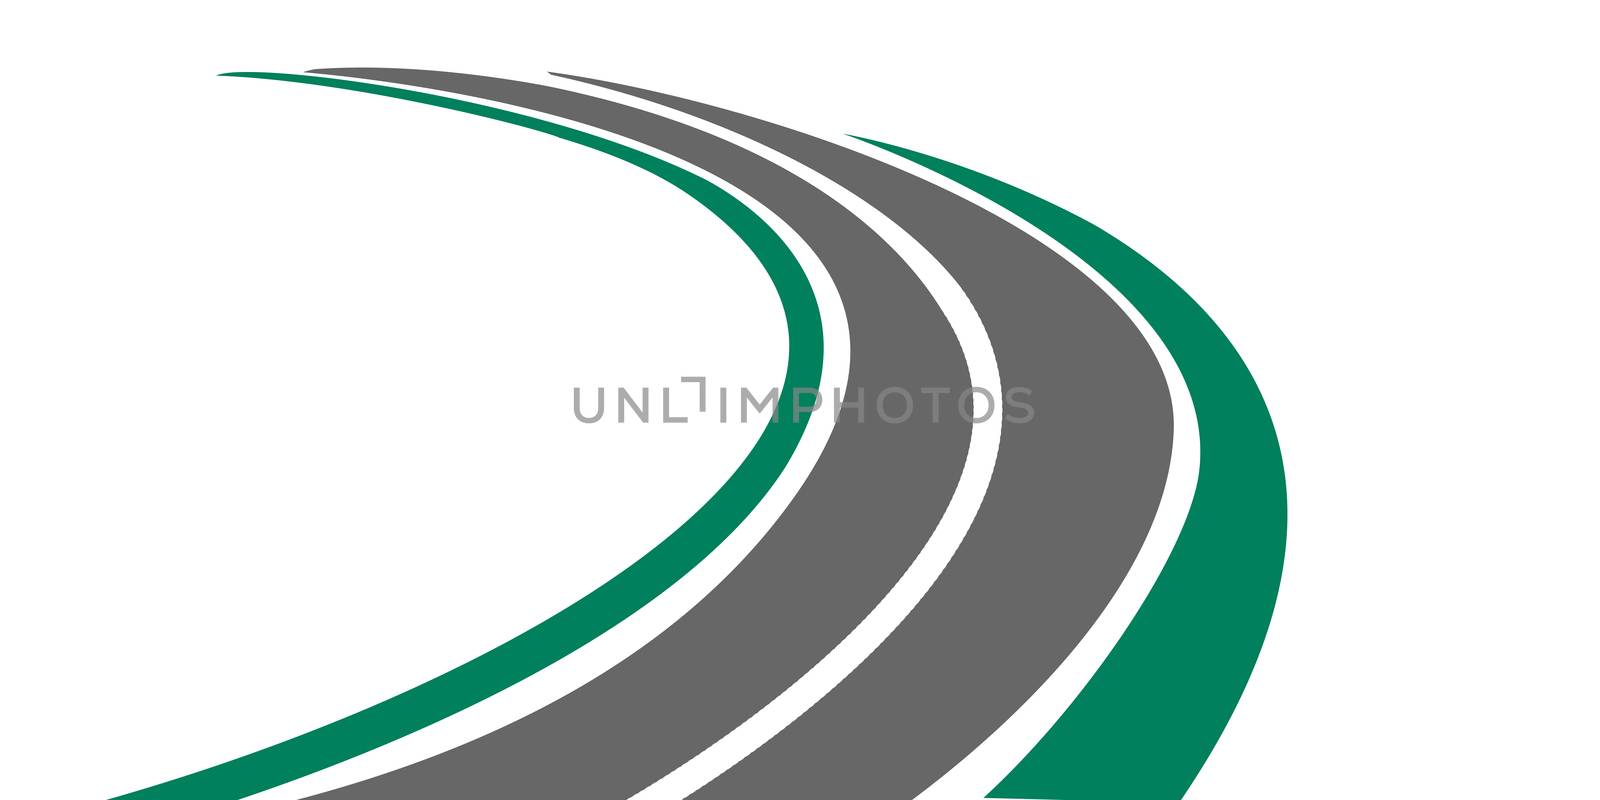 Winding paved road icon with green grassy roadside, 3D rendering